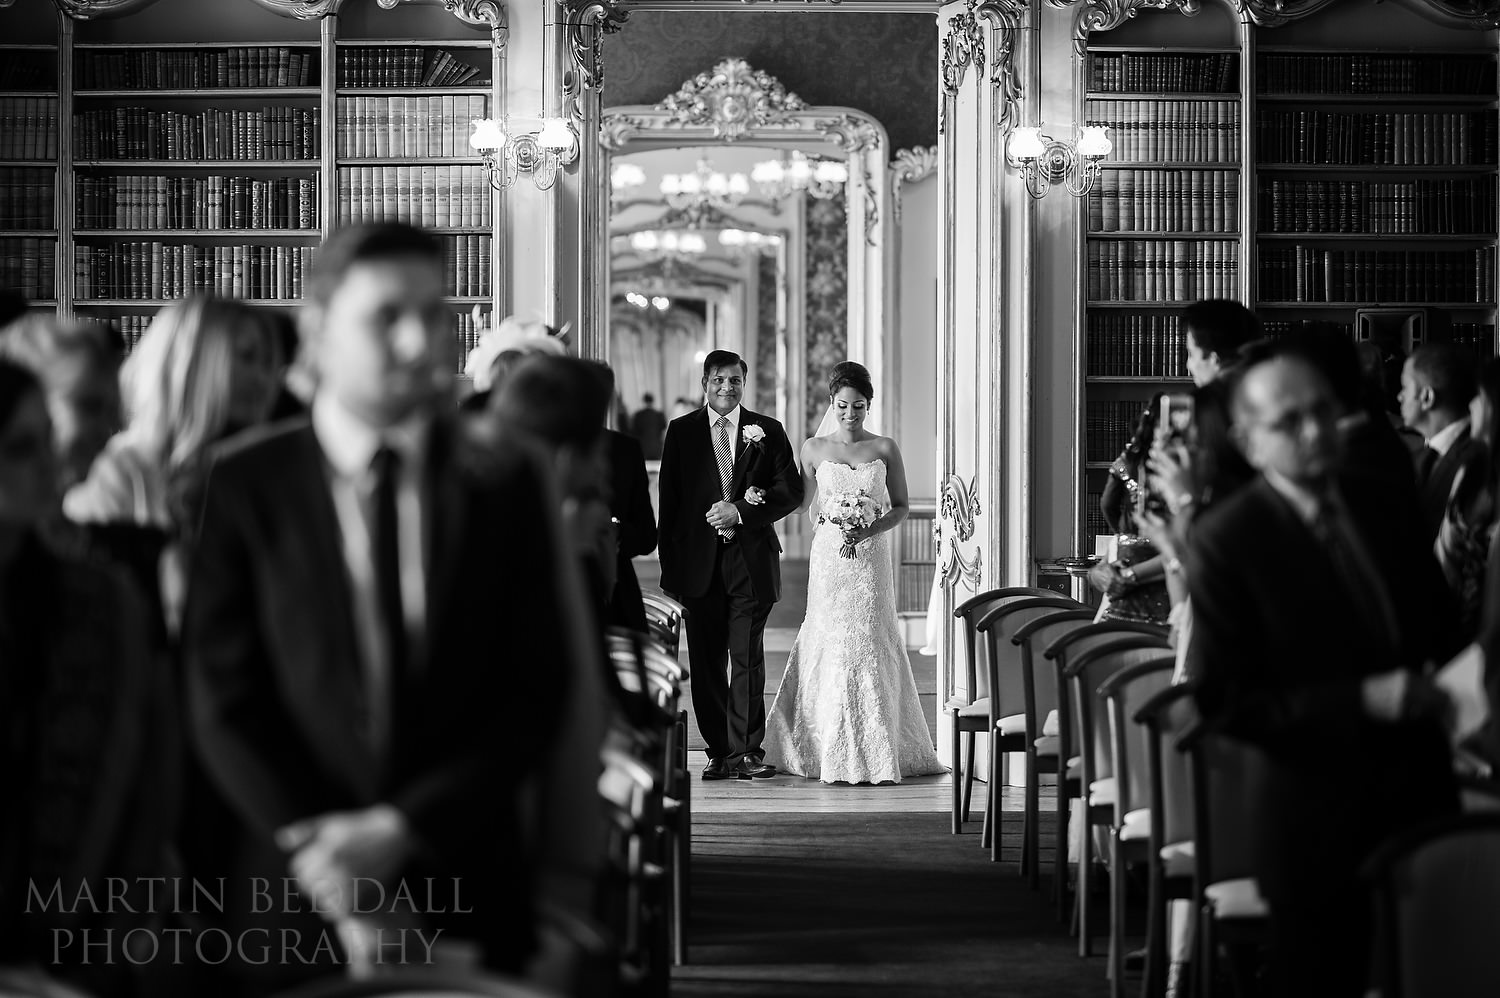 Bride and her father enter the ceremony room at Wrest Park